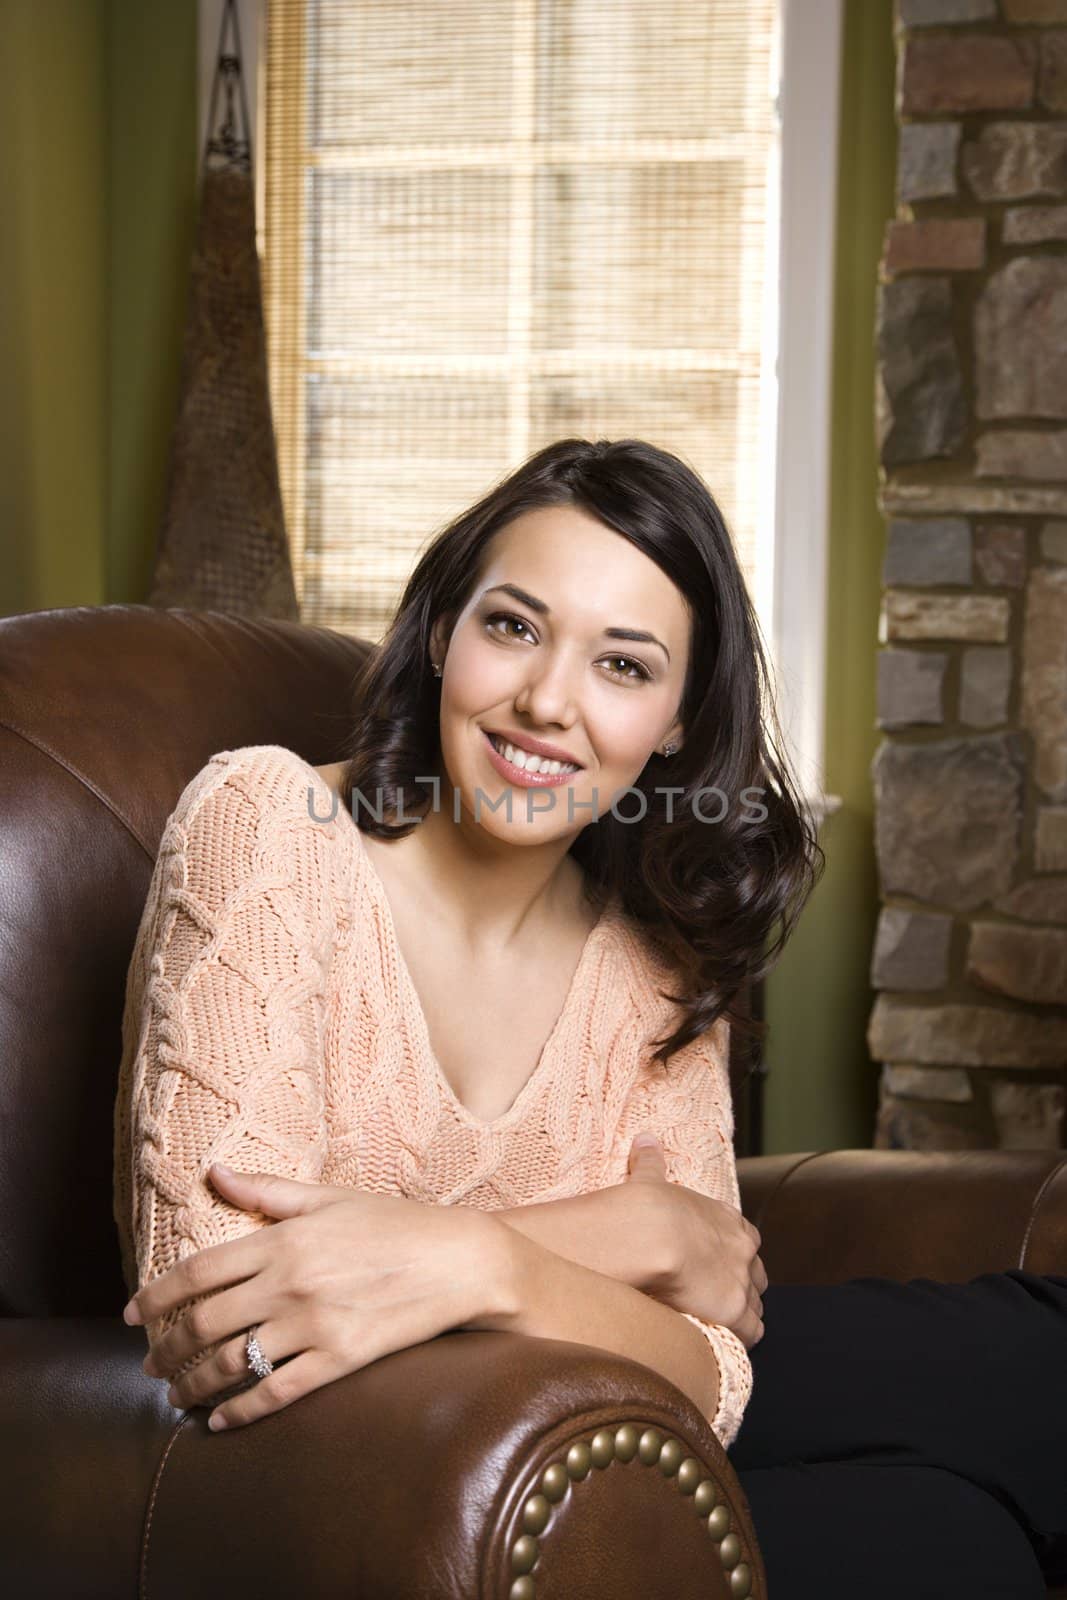 Caucasian/Hispanic young woman sitting in leather chair smiling and looking at viewer.